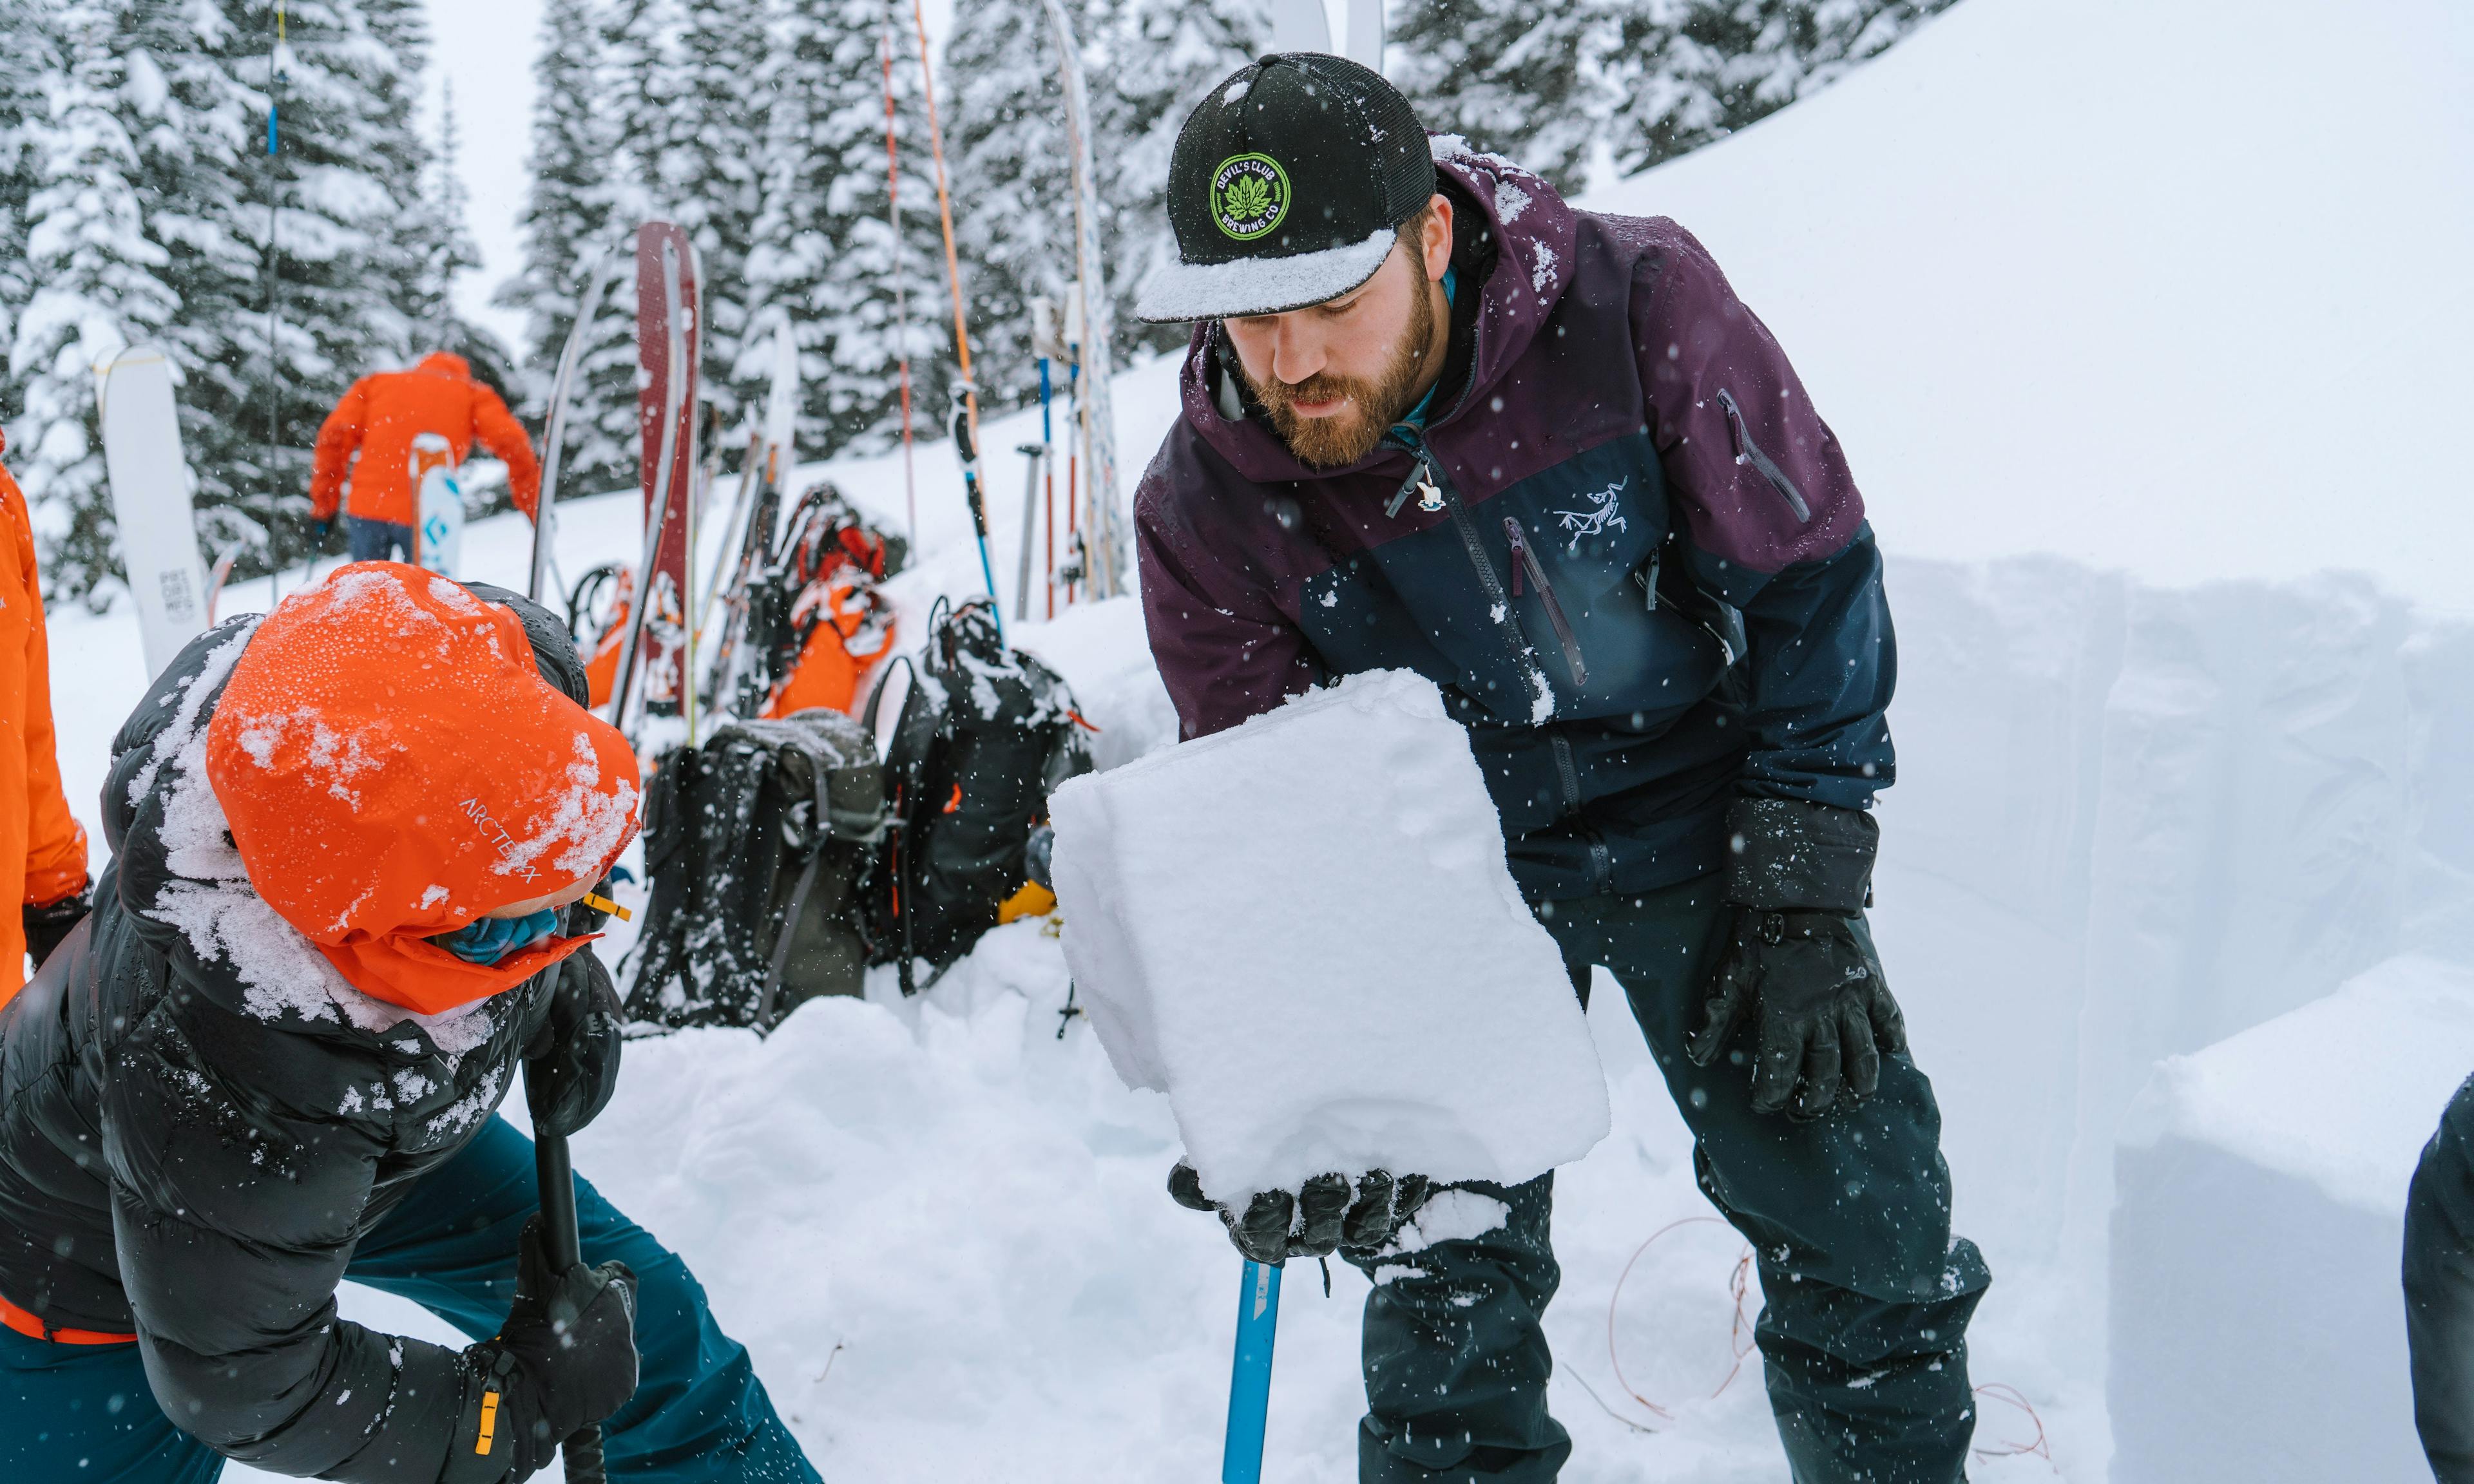 Avalanche safety training with snowblock